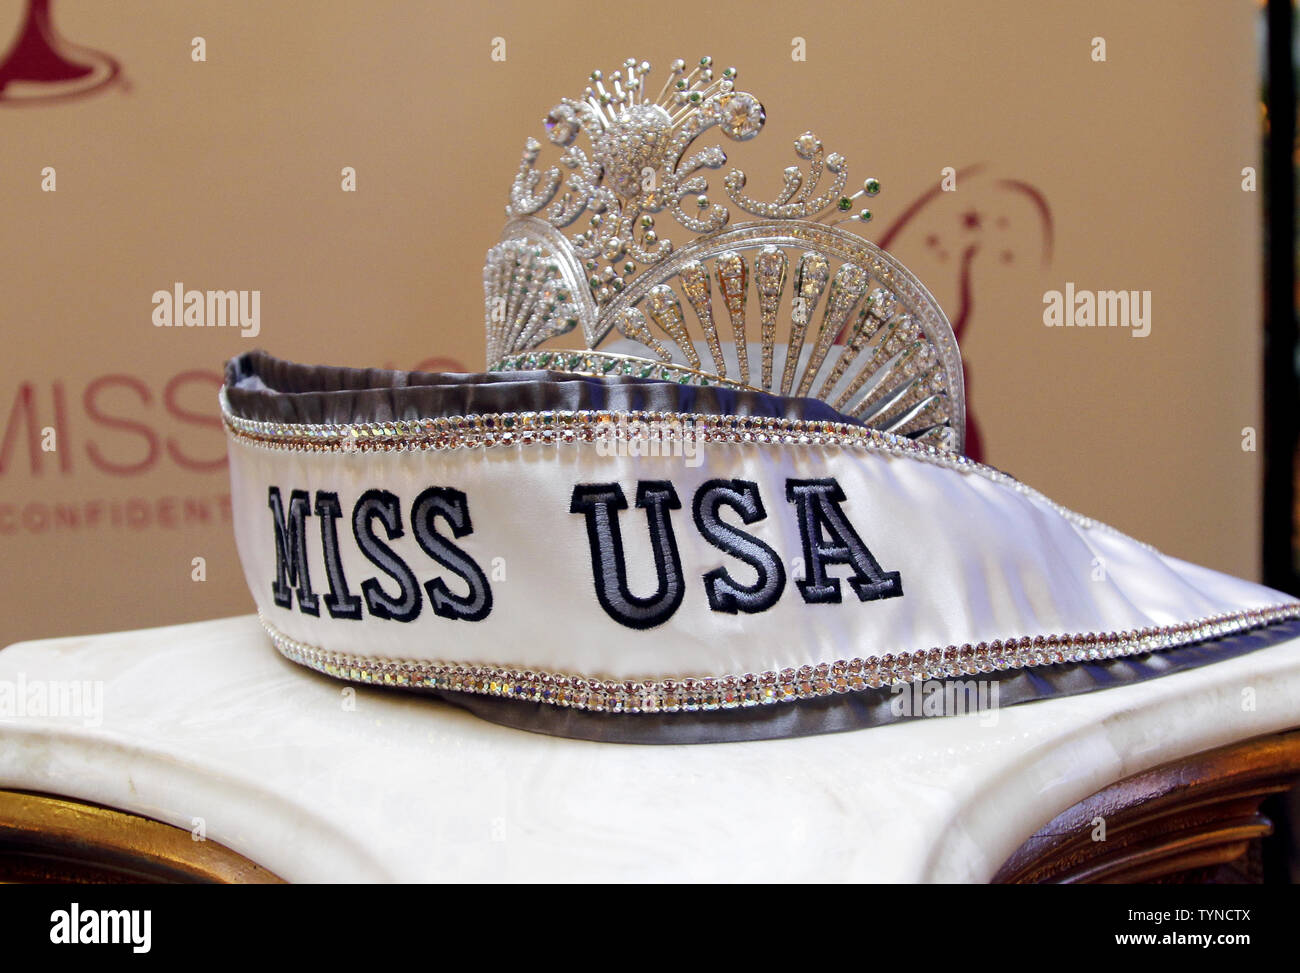 The Miss USA crown and sash are set on the stage for the crowning ceremony  of the new Miss USA at Trump Tower in New York City on January 9, 2013. Nana